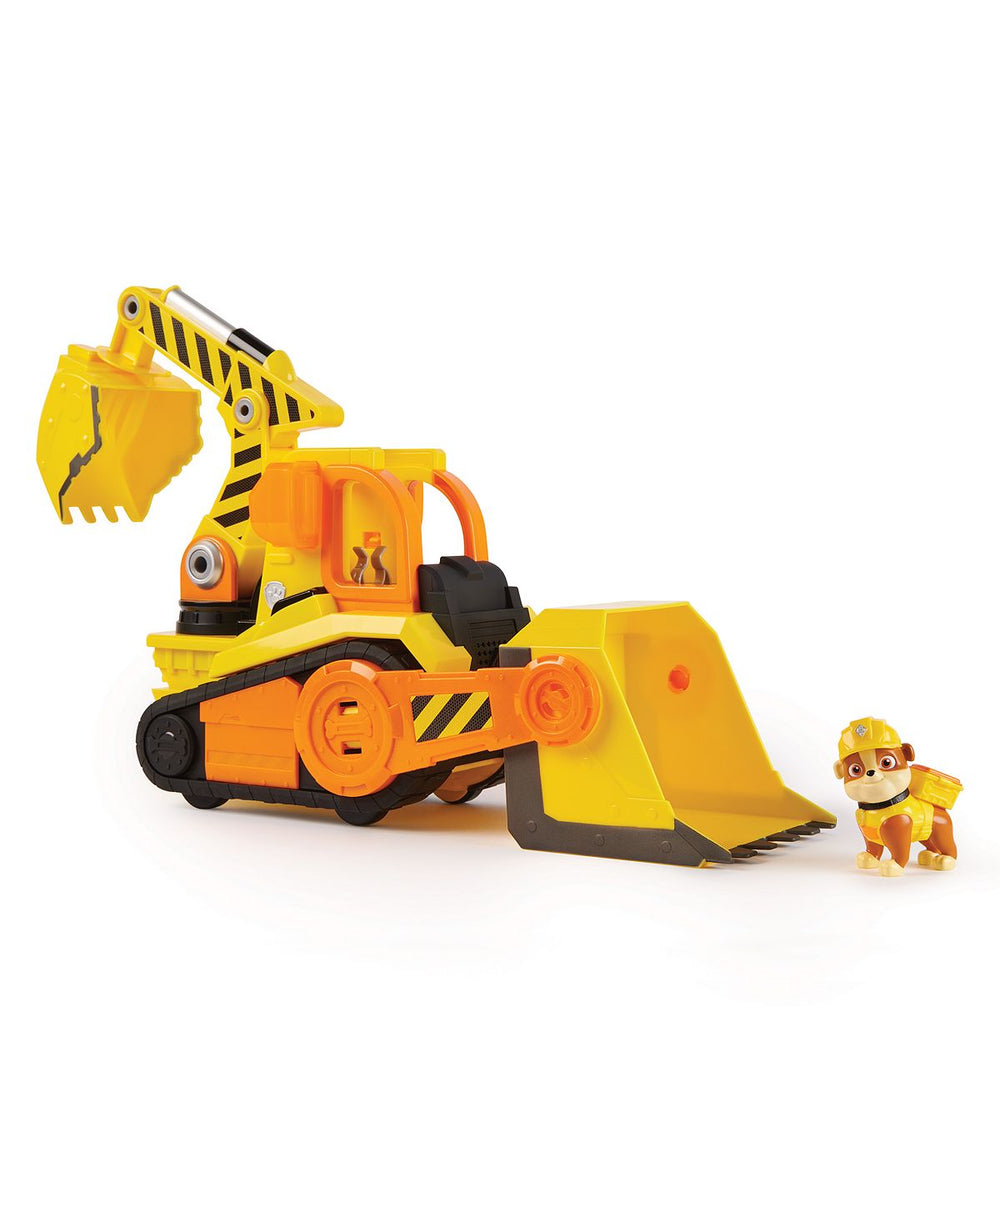 Rubble & Crew Deluxe Bulldozer with Lights and Sounds, Featuring PAW Patrol's Rubble